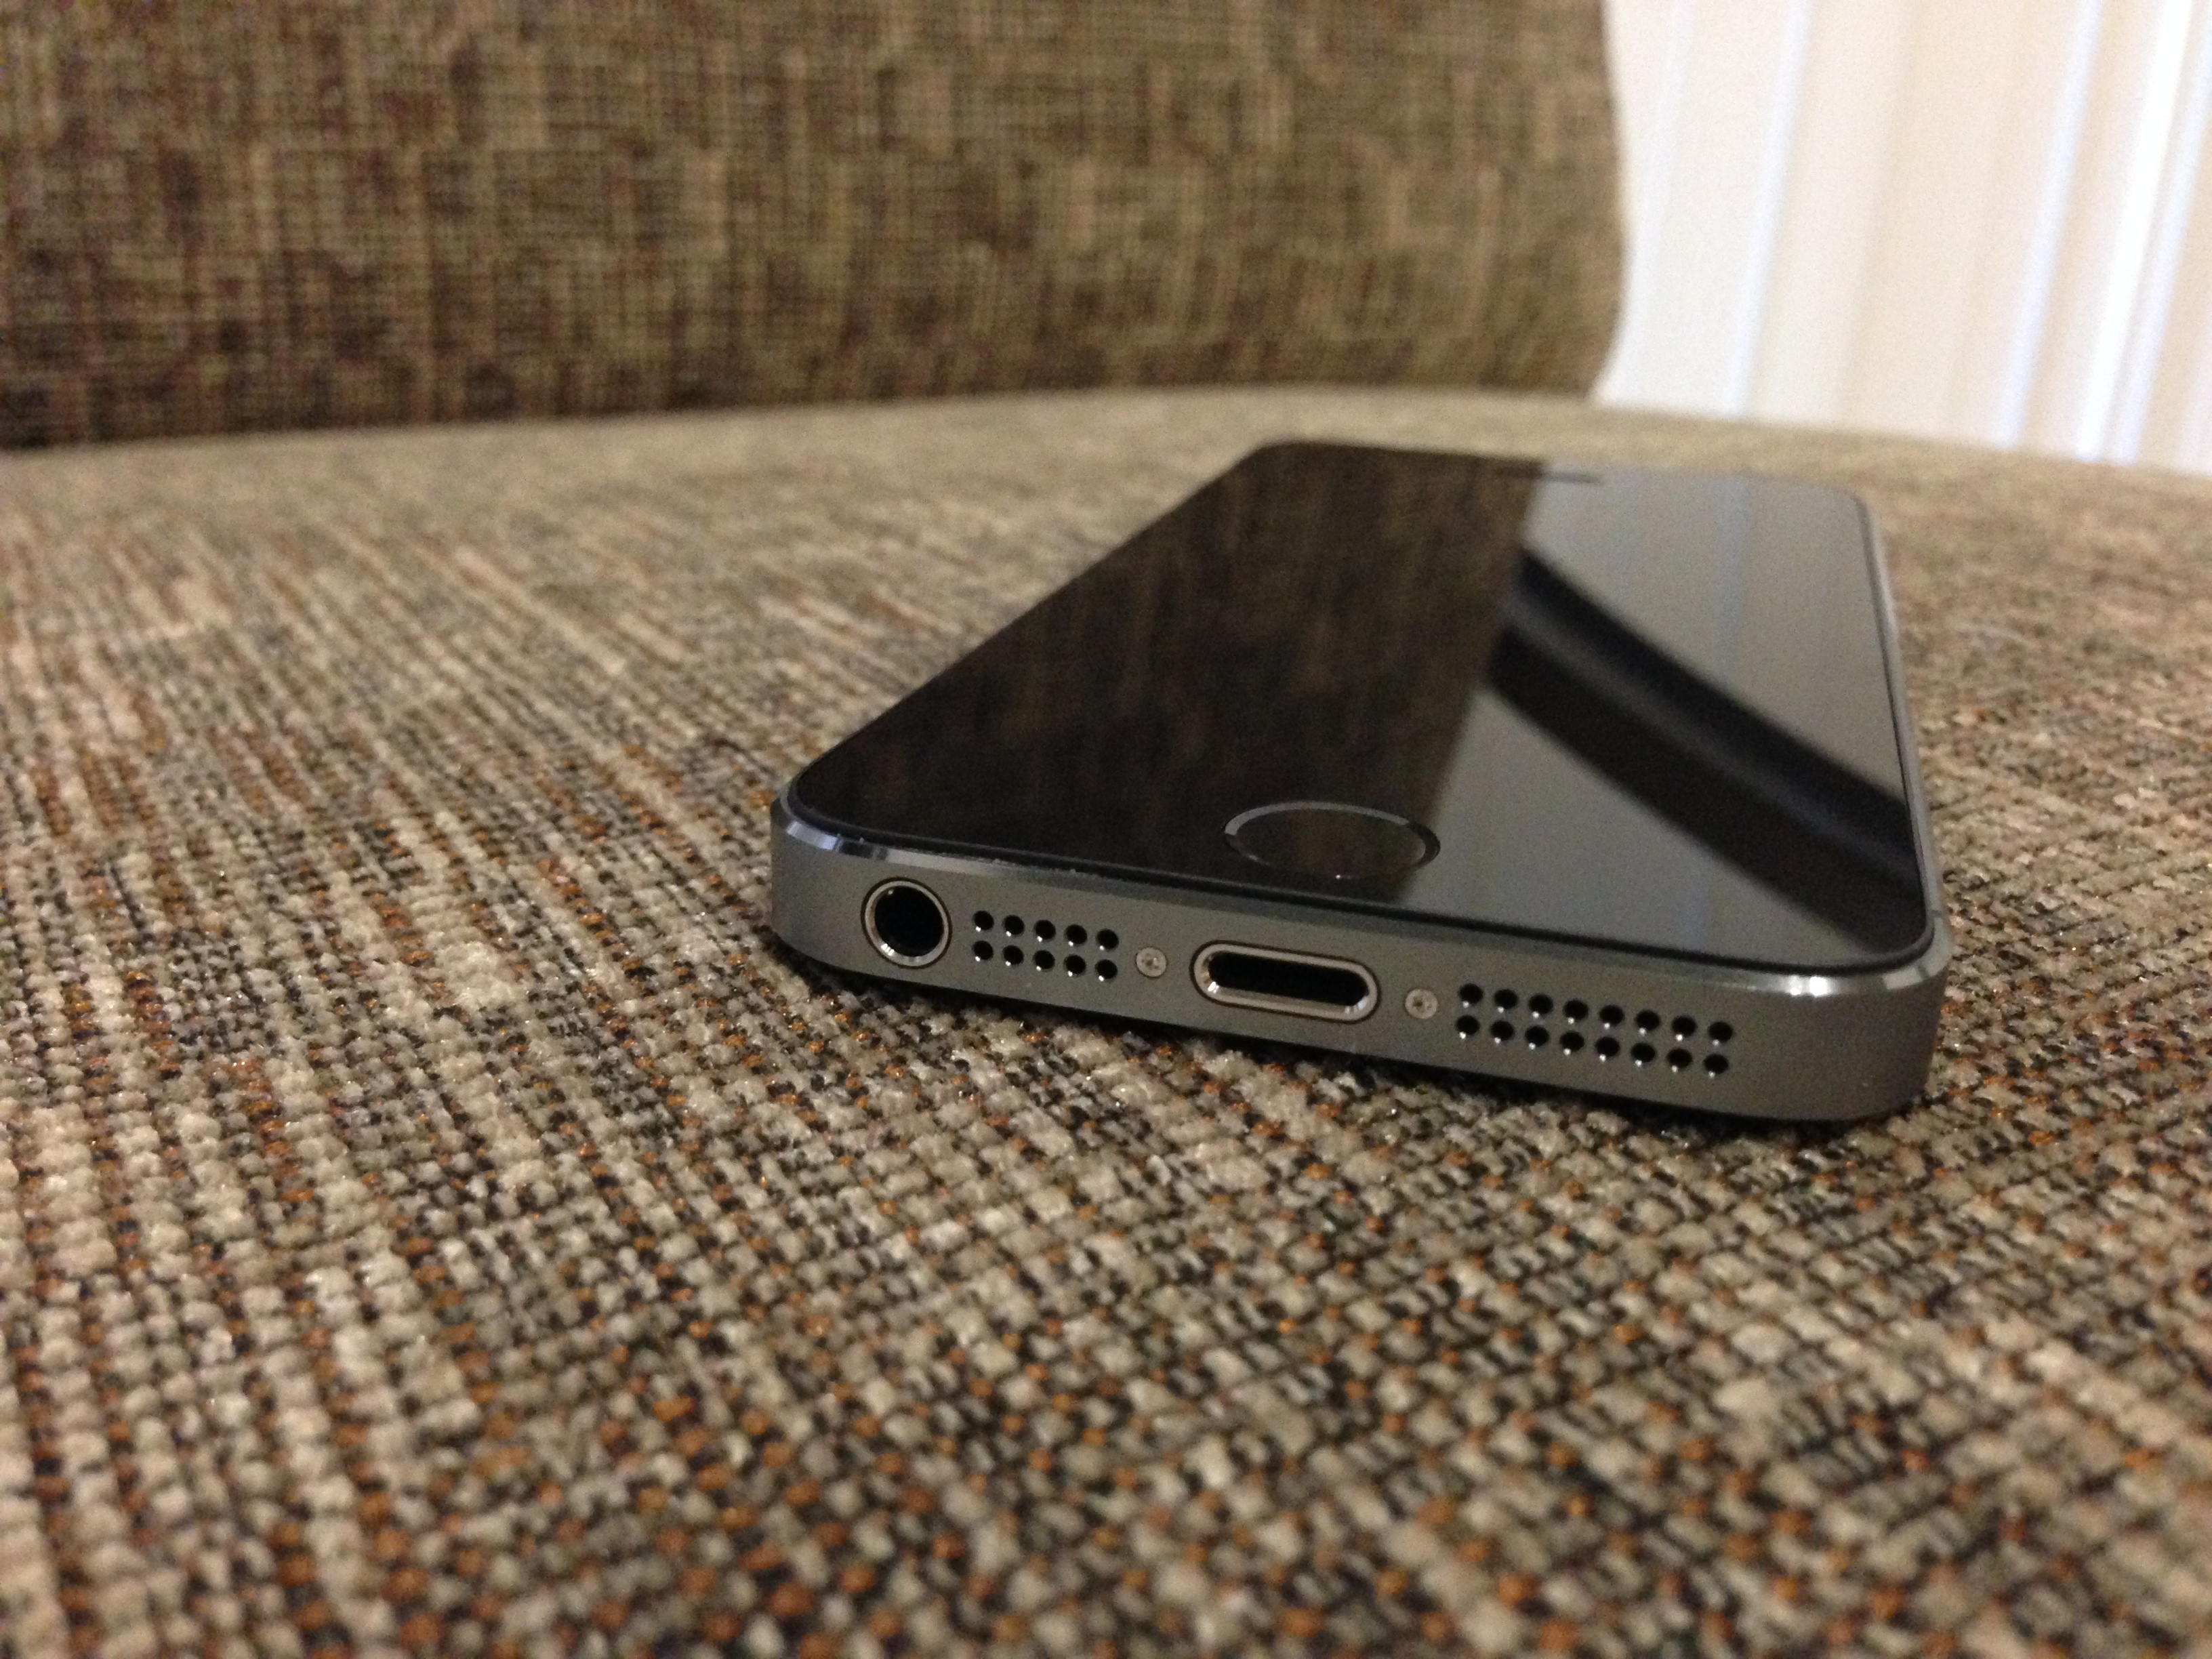 Apple iPhone 5s Review! 